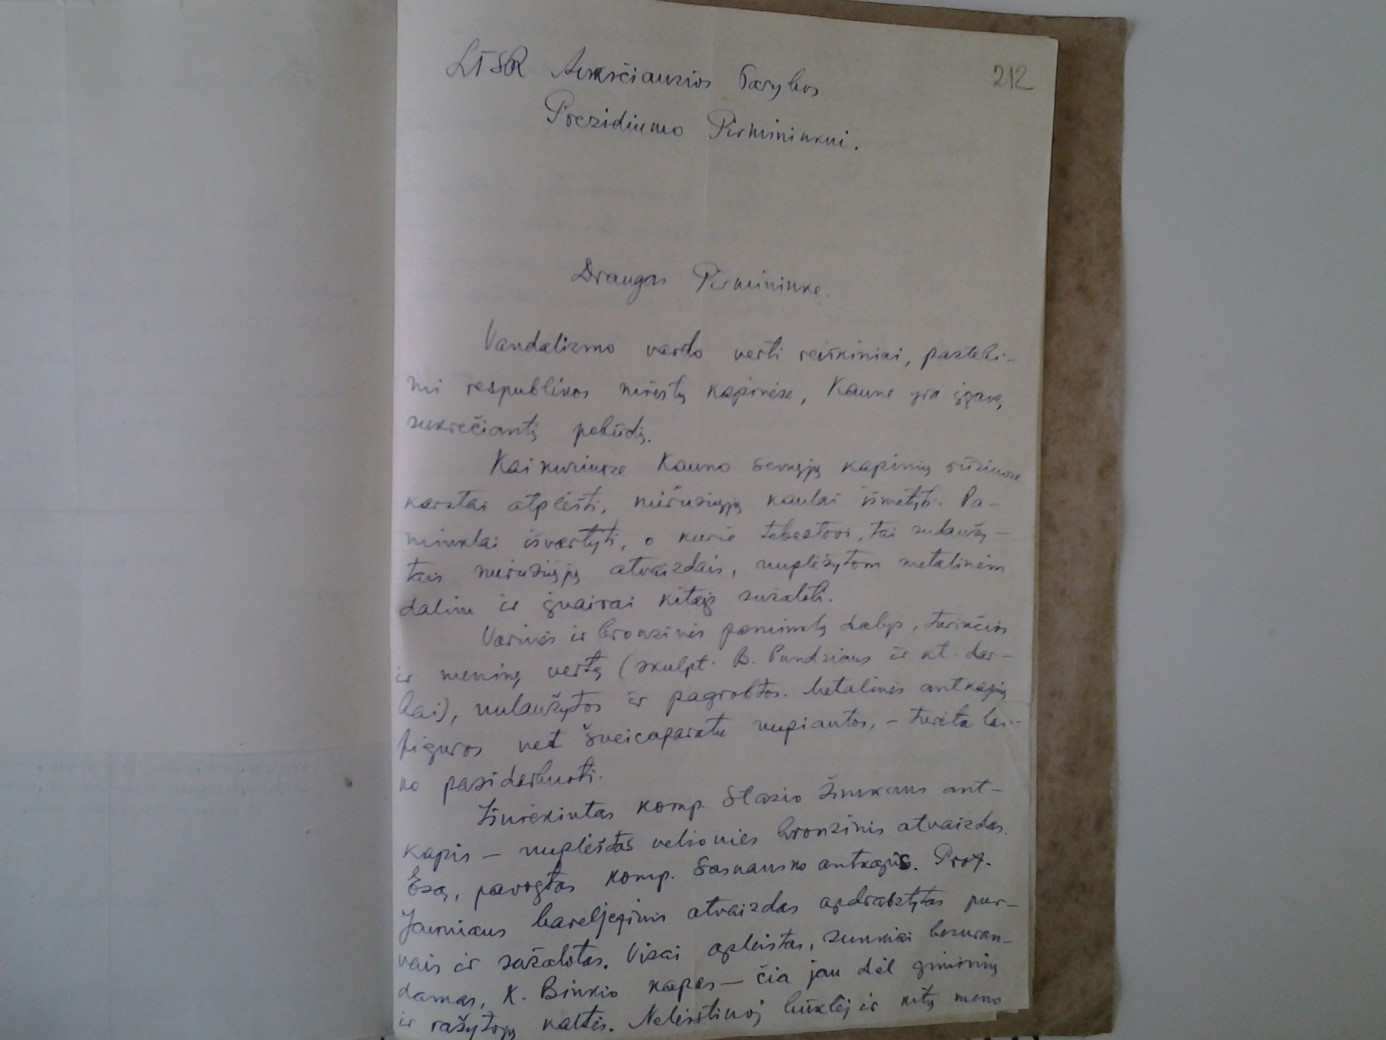 Augustinas Gricius letter to Justas Paleckis. 1953. Source: Lithuanian Communist party documents archive.